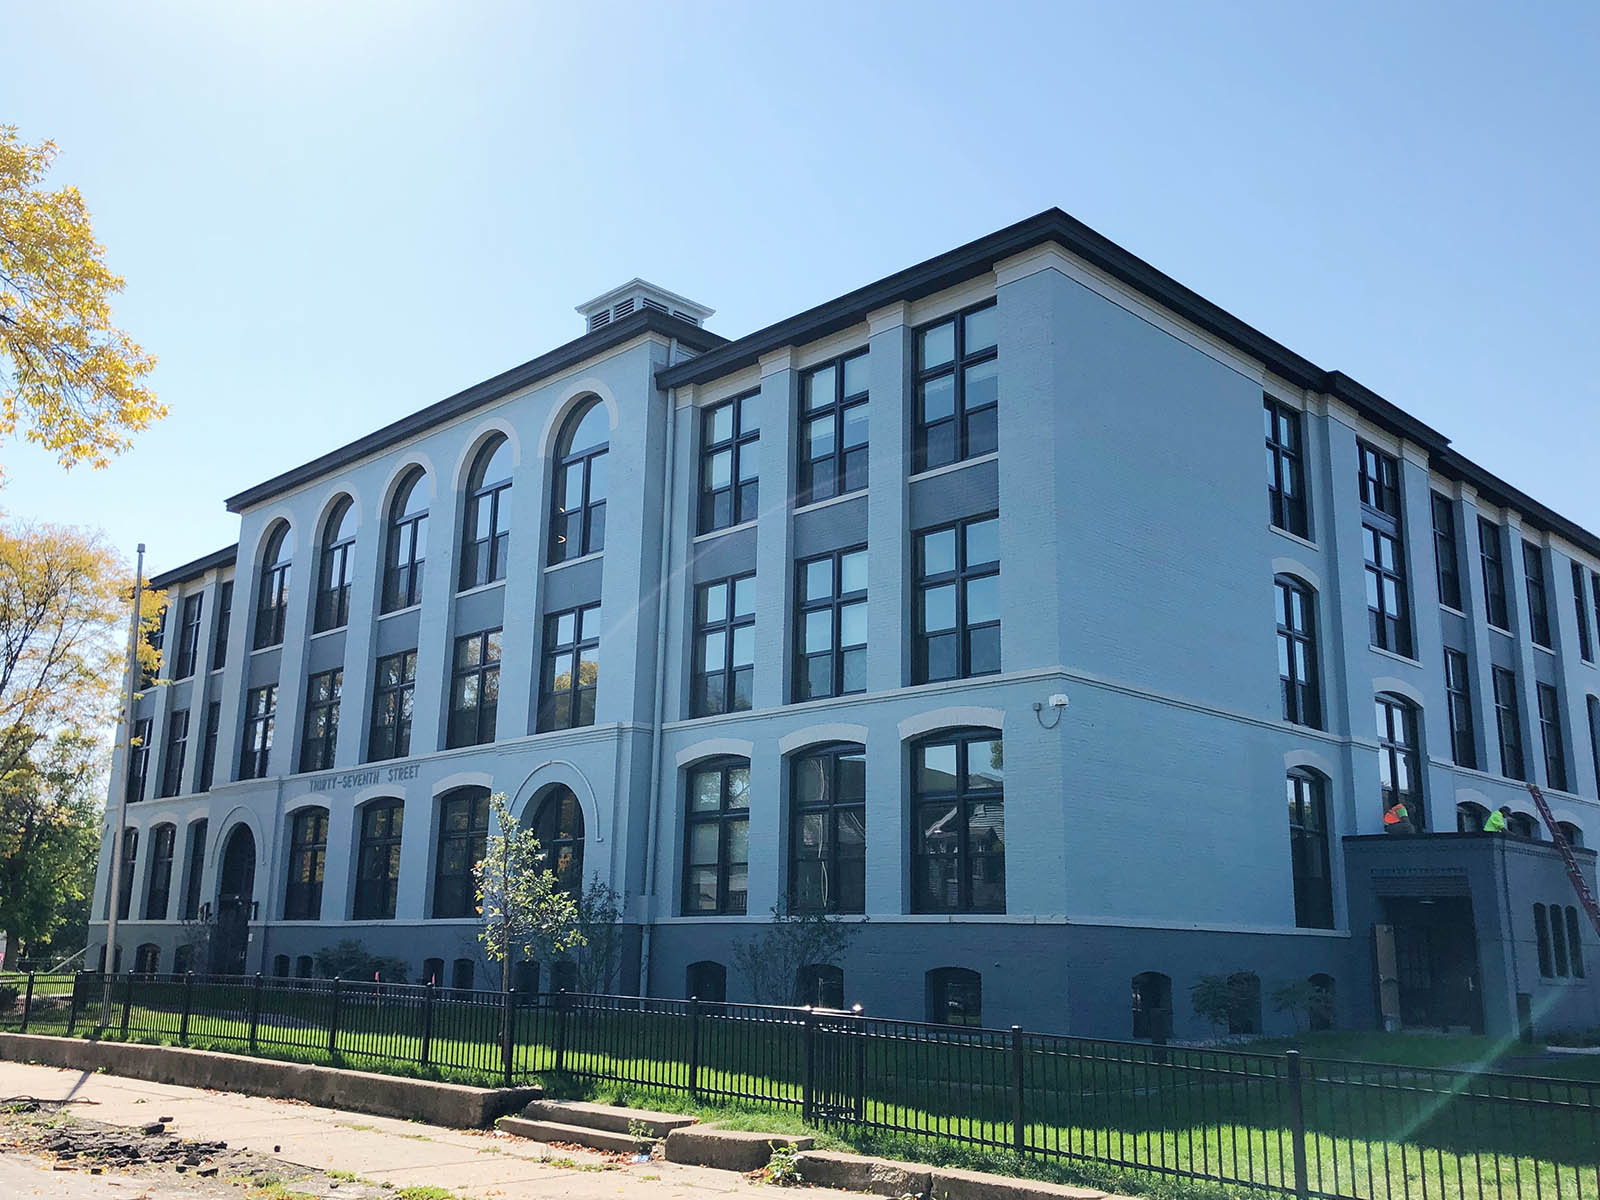 OnMilwaukee: First look: Senior housing in the 118-year-old 37th Street School building